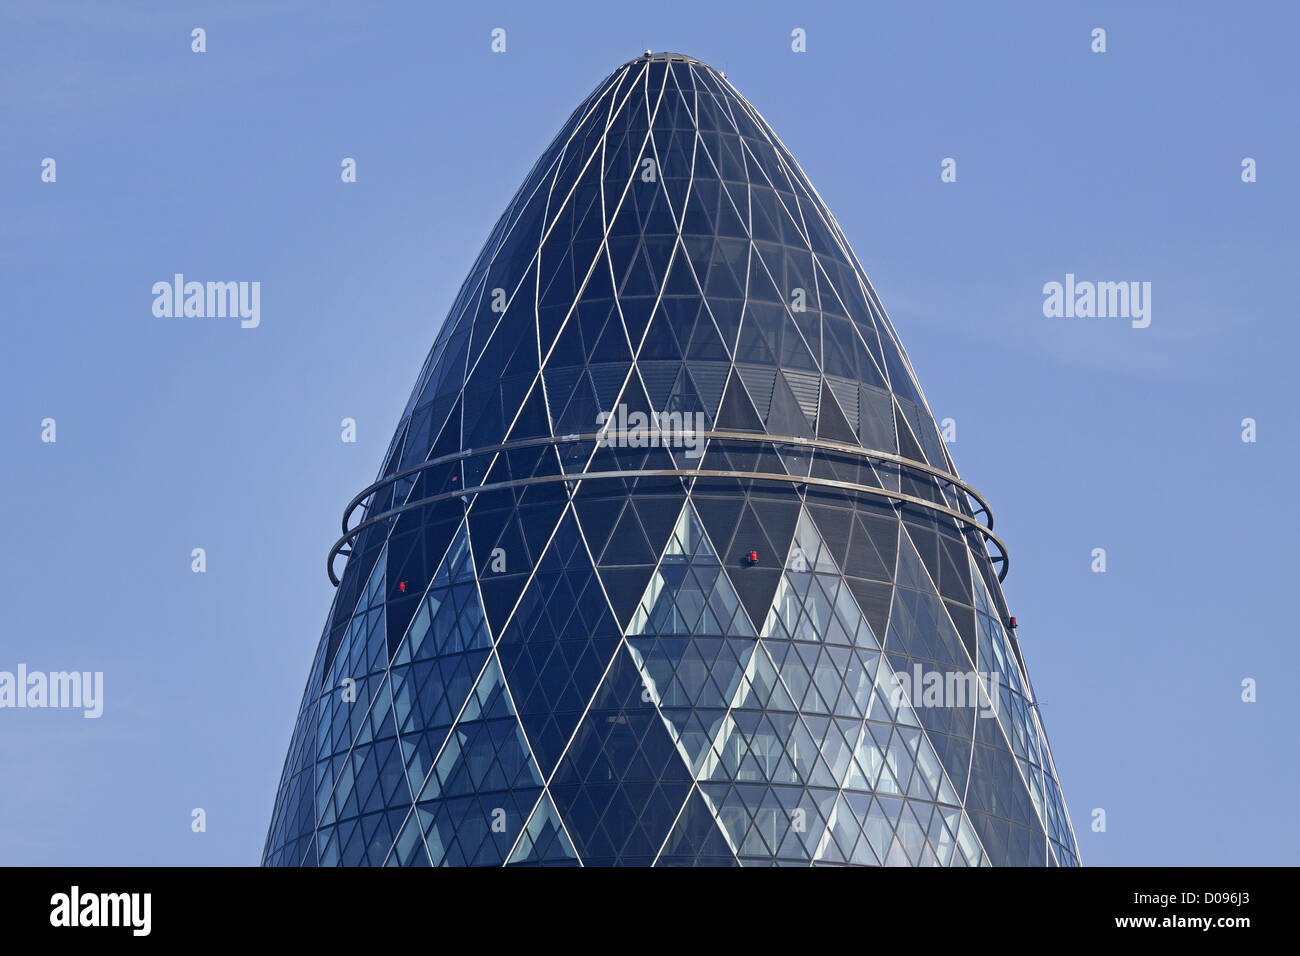 TOP SWISS RE BUILDING 30 ST MARY AXE BUILDING BUILT IN HEART CITY LONDON ARCHITECTS' FIRM NORMAN FOSTER BUILDING KNOWN ITS Stock Photo